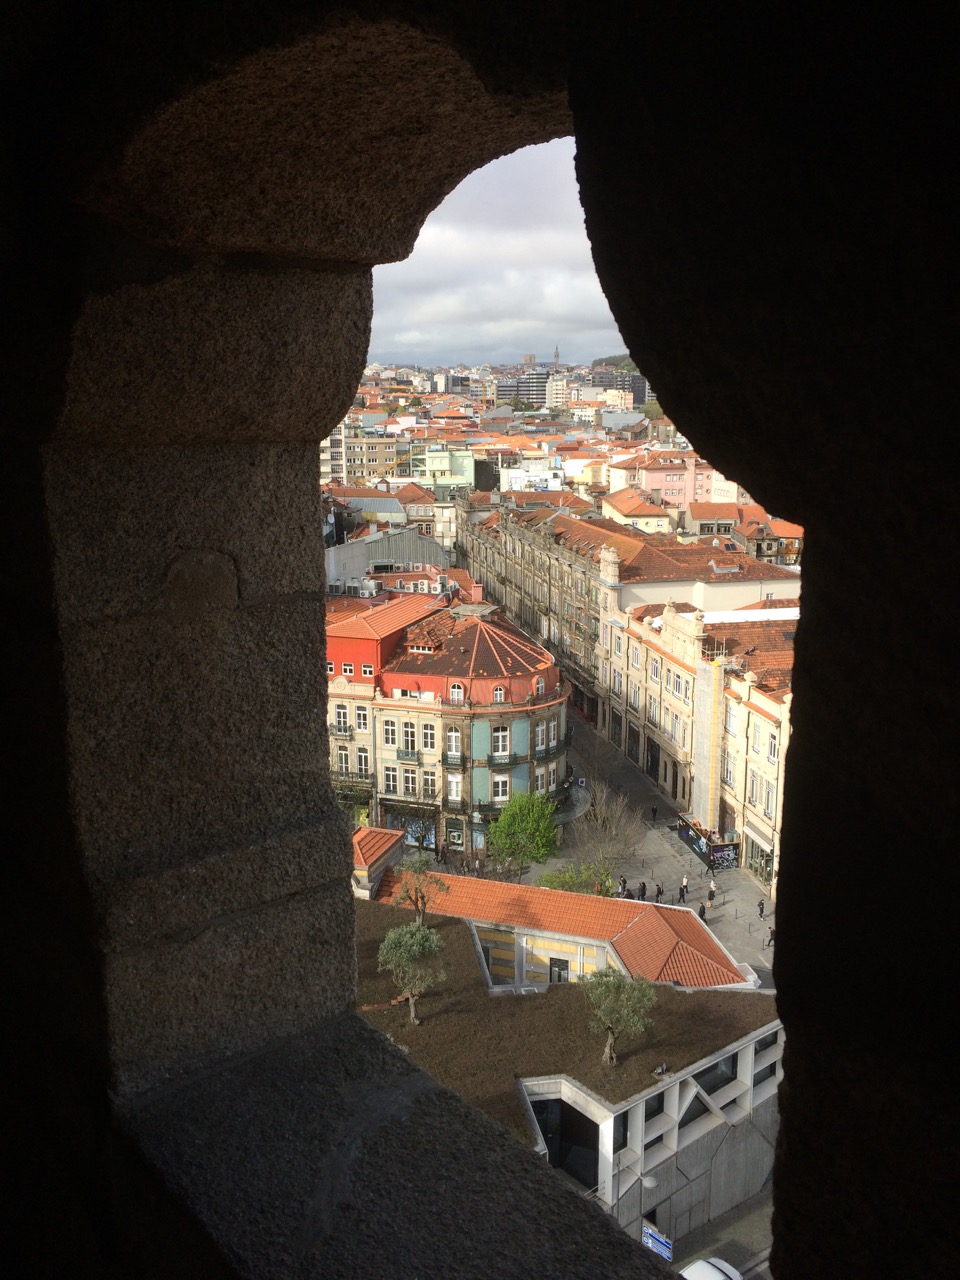 Porto's view from the tower